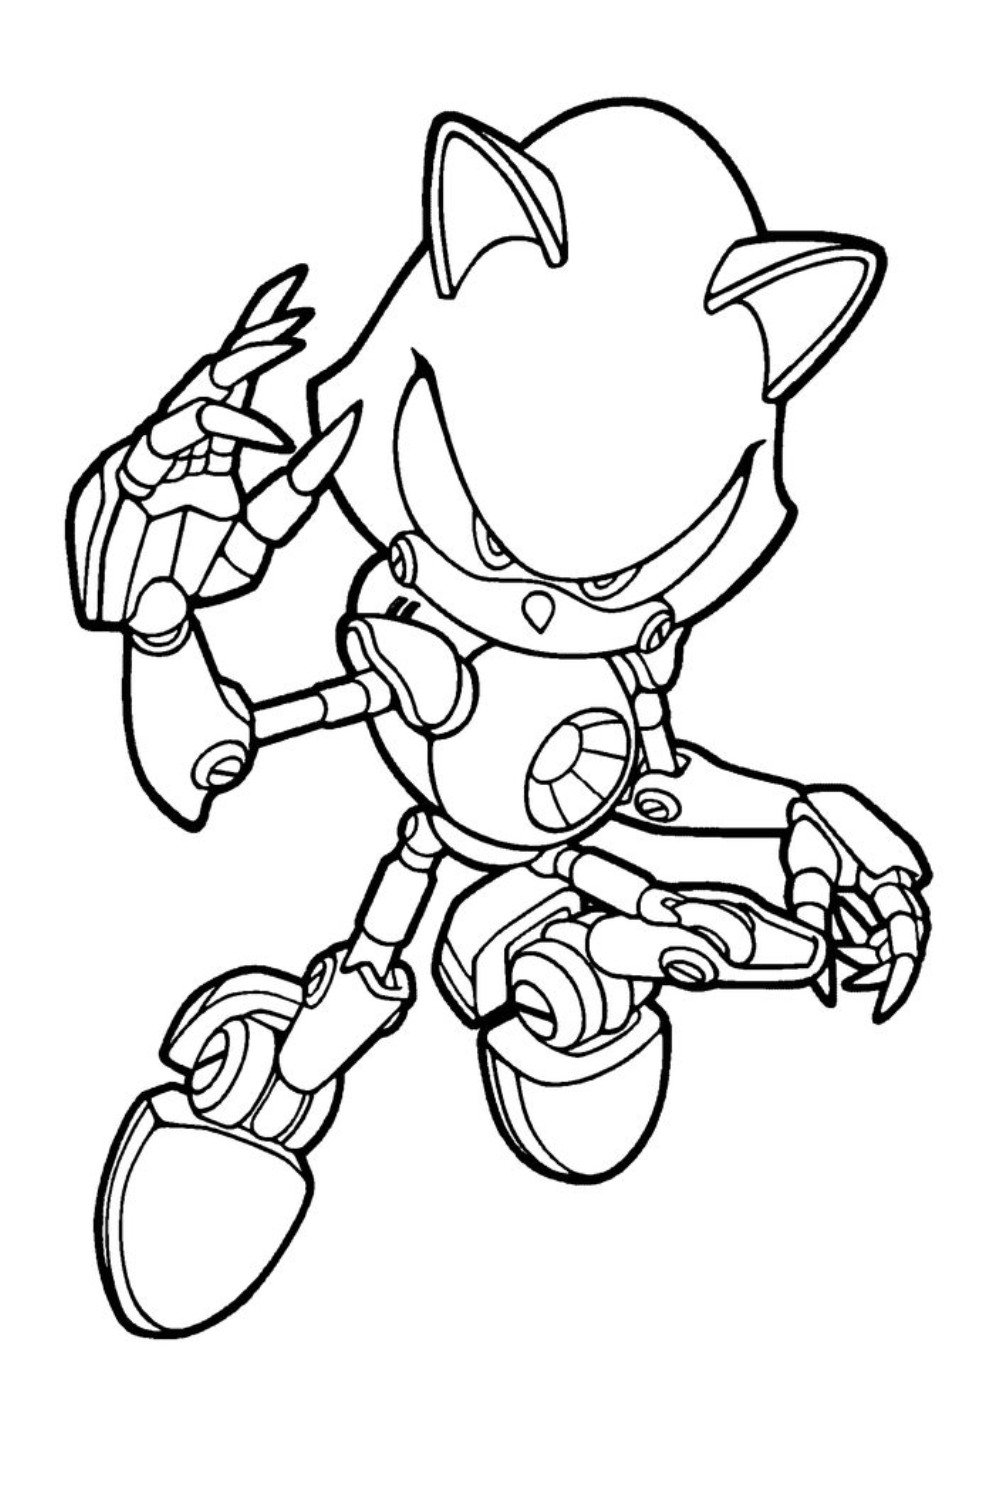 sonic the hedgehog coloring sheets free